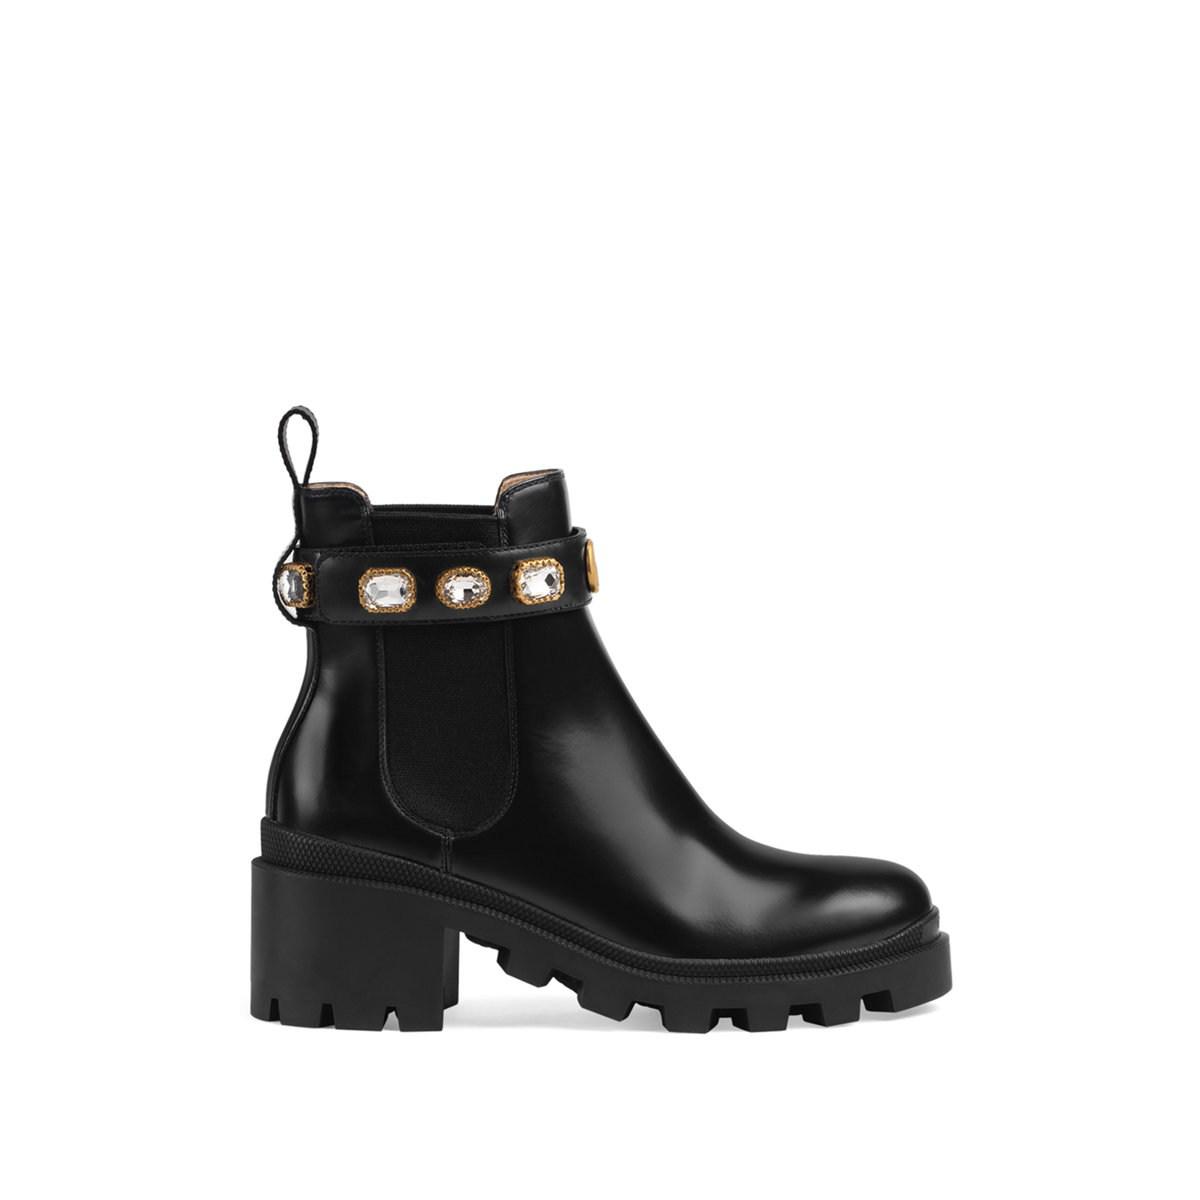 Gucci Leather Gemstone Chelsea Boots in Nero (Black) - Lyst